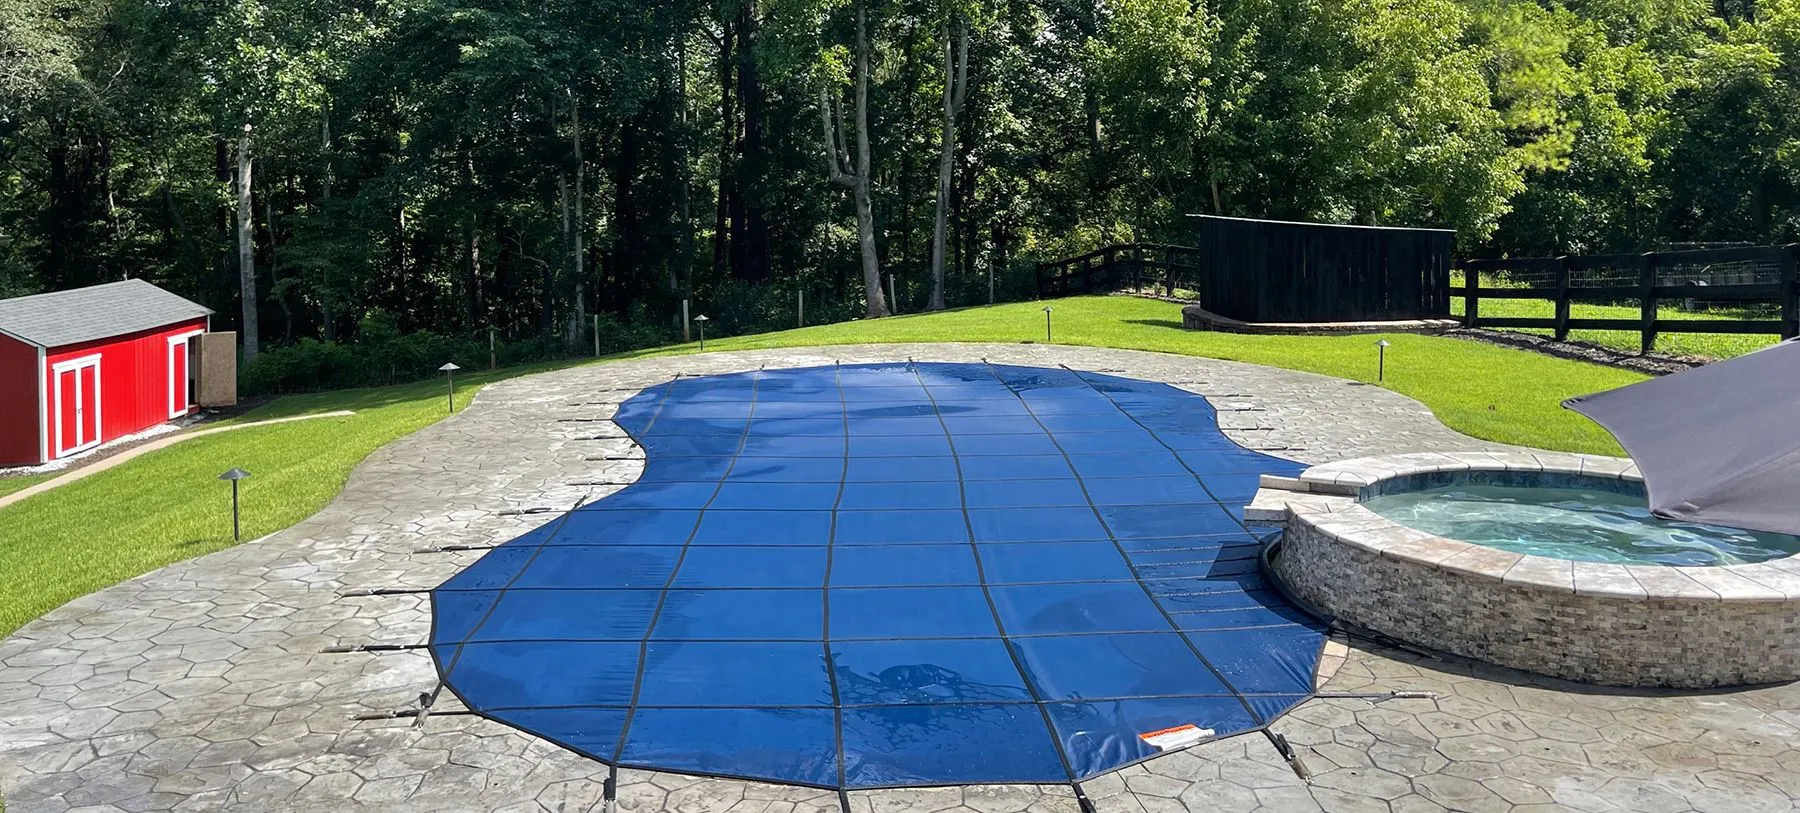 A kidney shaped swimming pool with blue safety cover and a hot tub.